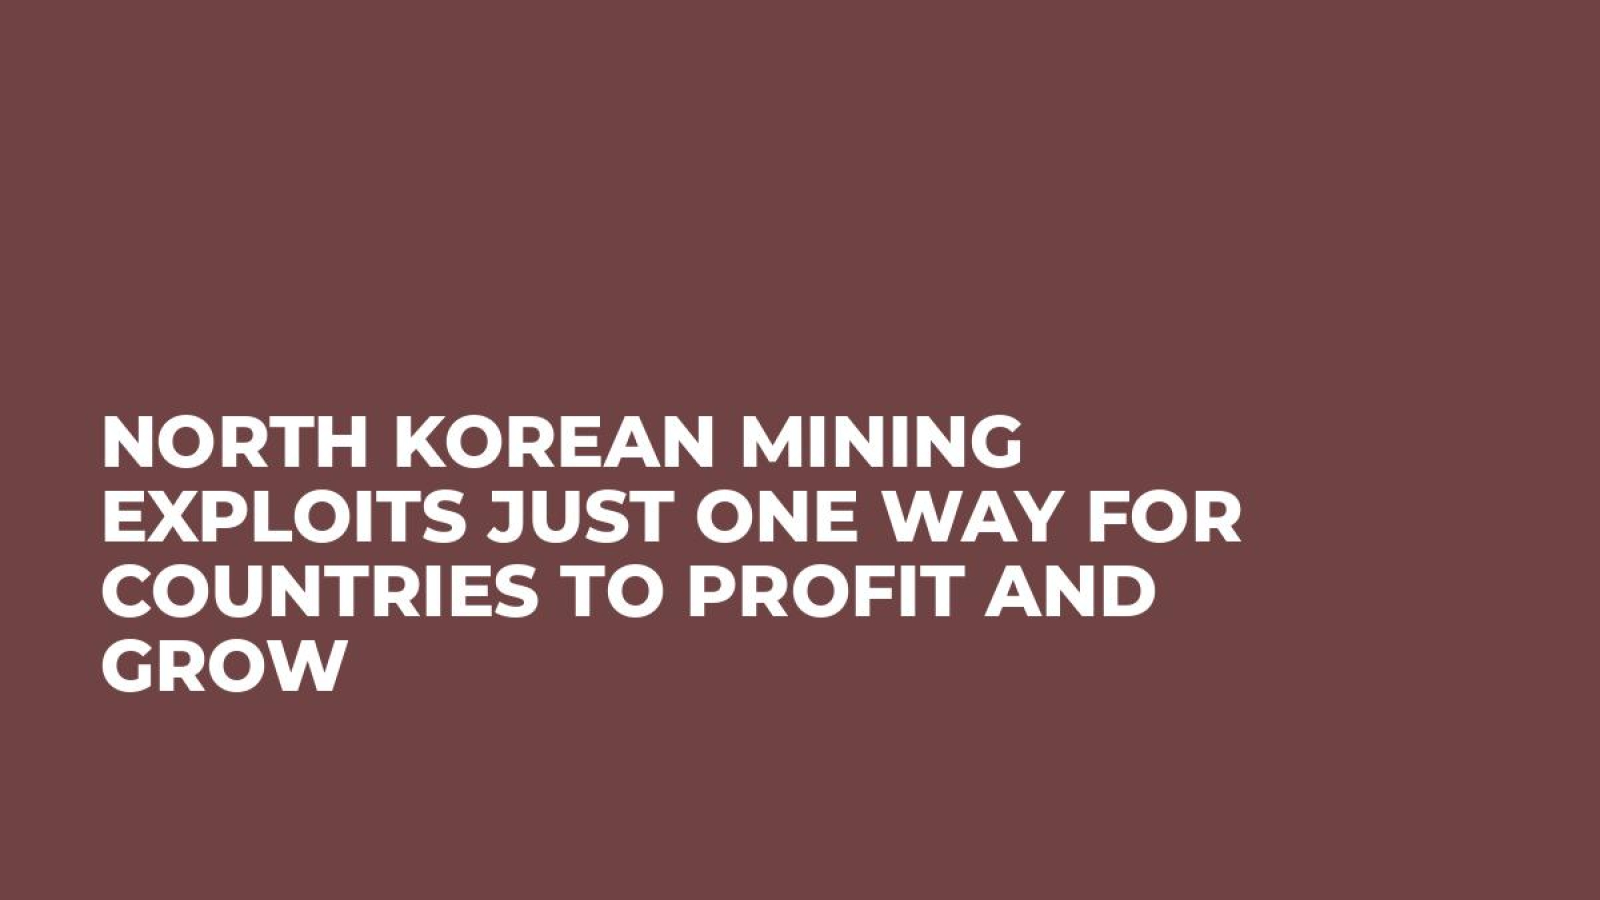 North Korean Mining Exploits Just One Way For Countries to Profit and Grow